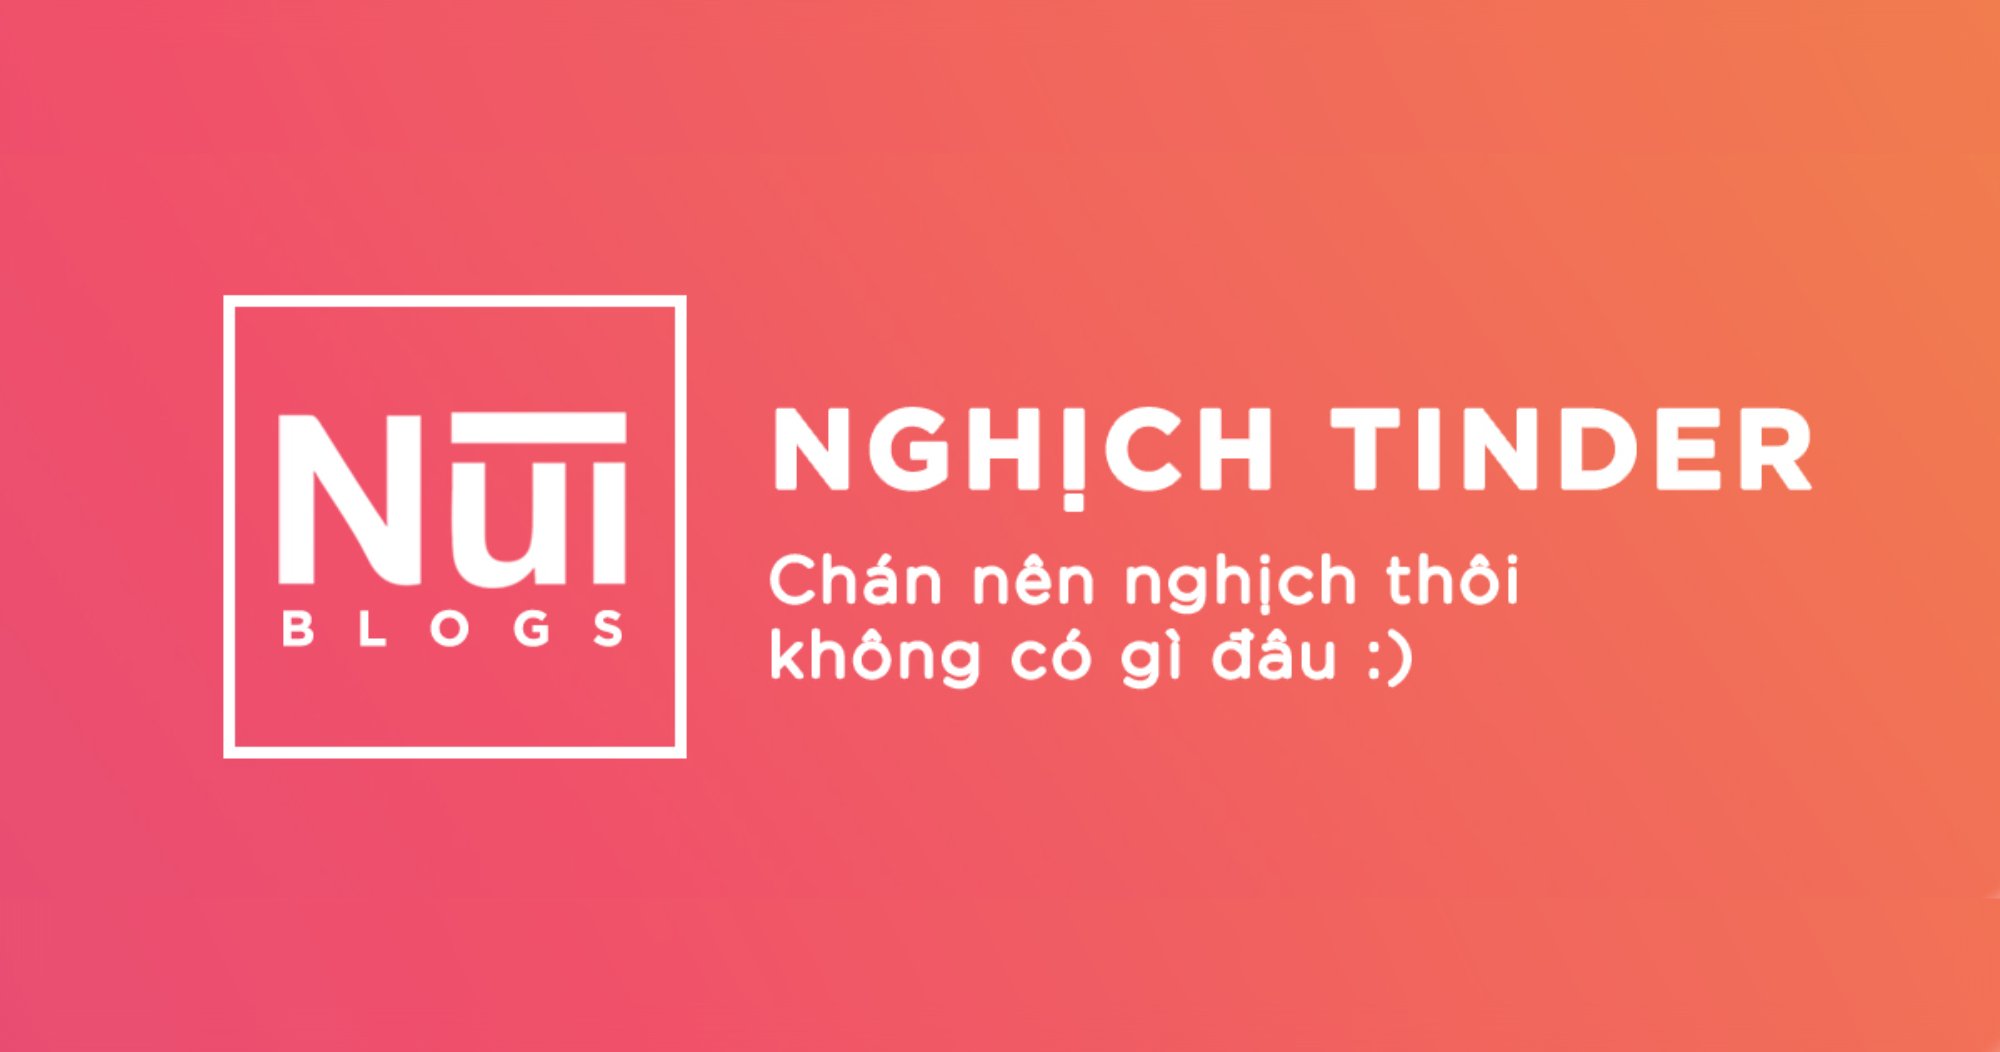 #41: nghịch tinder 